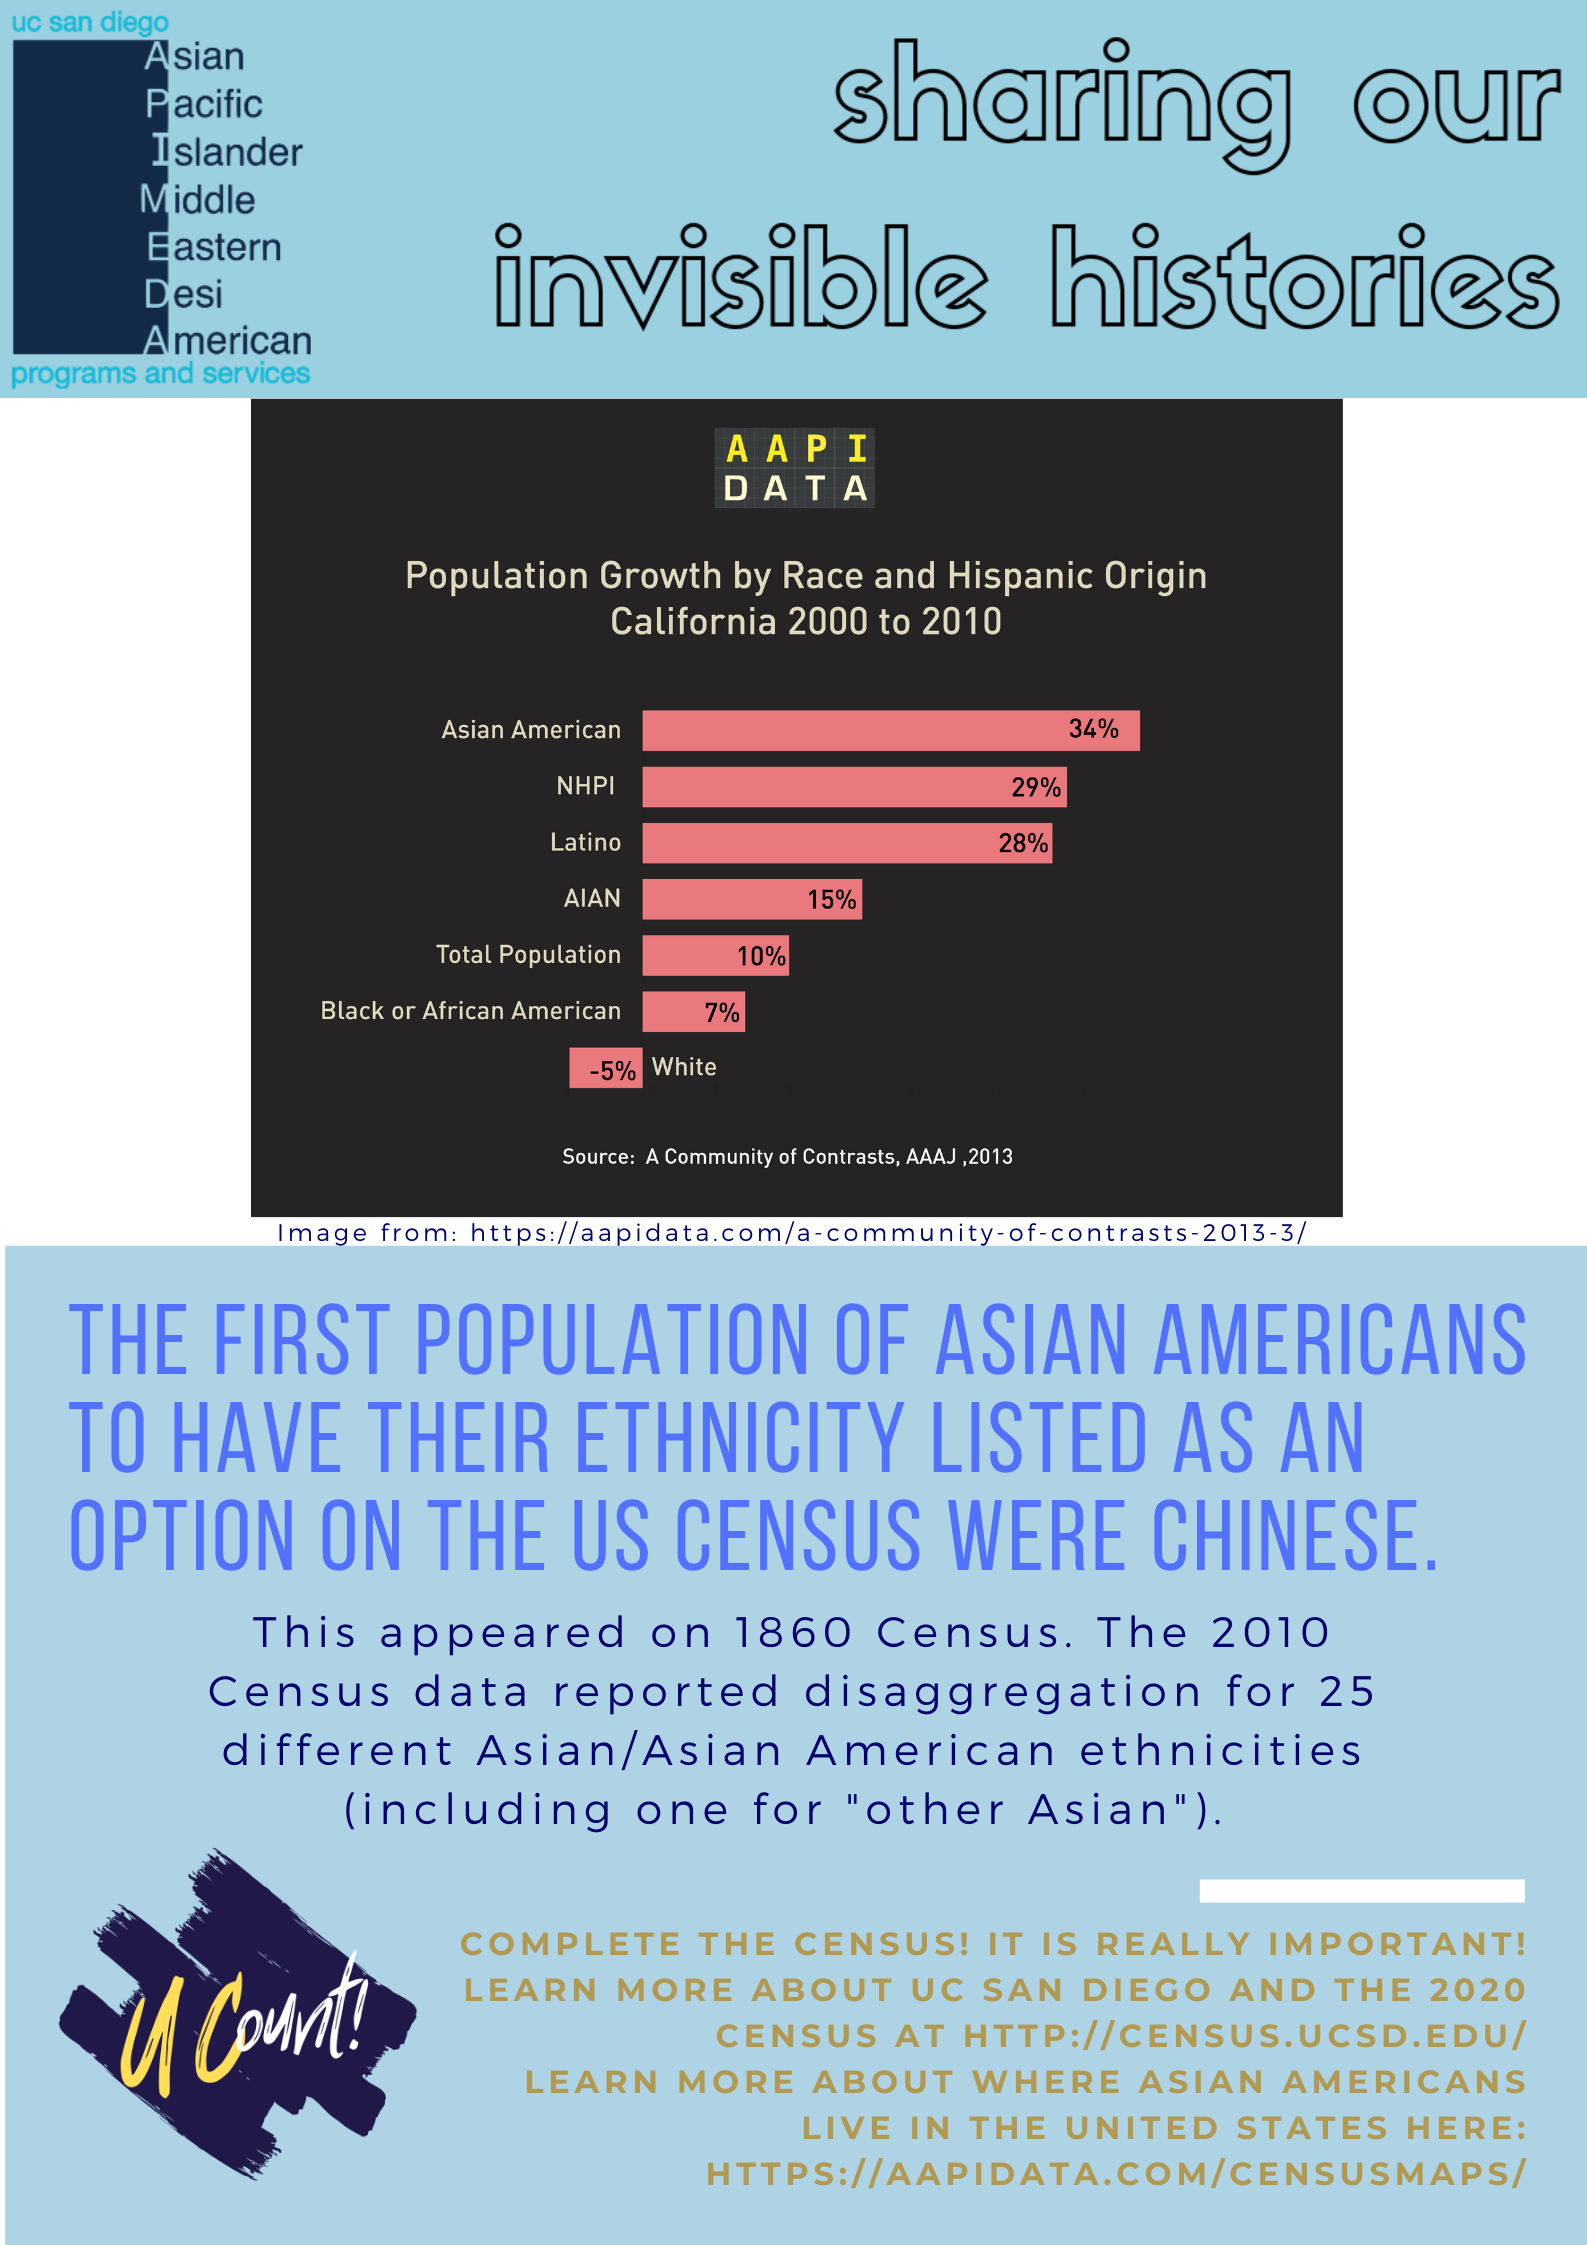 The image is a bar graph with disaggregated Asian American/Pacific Islander data